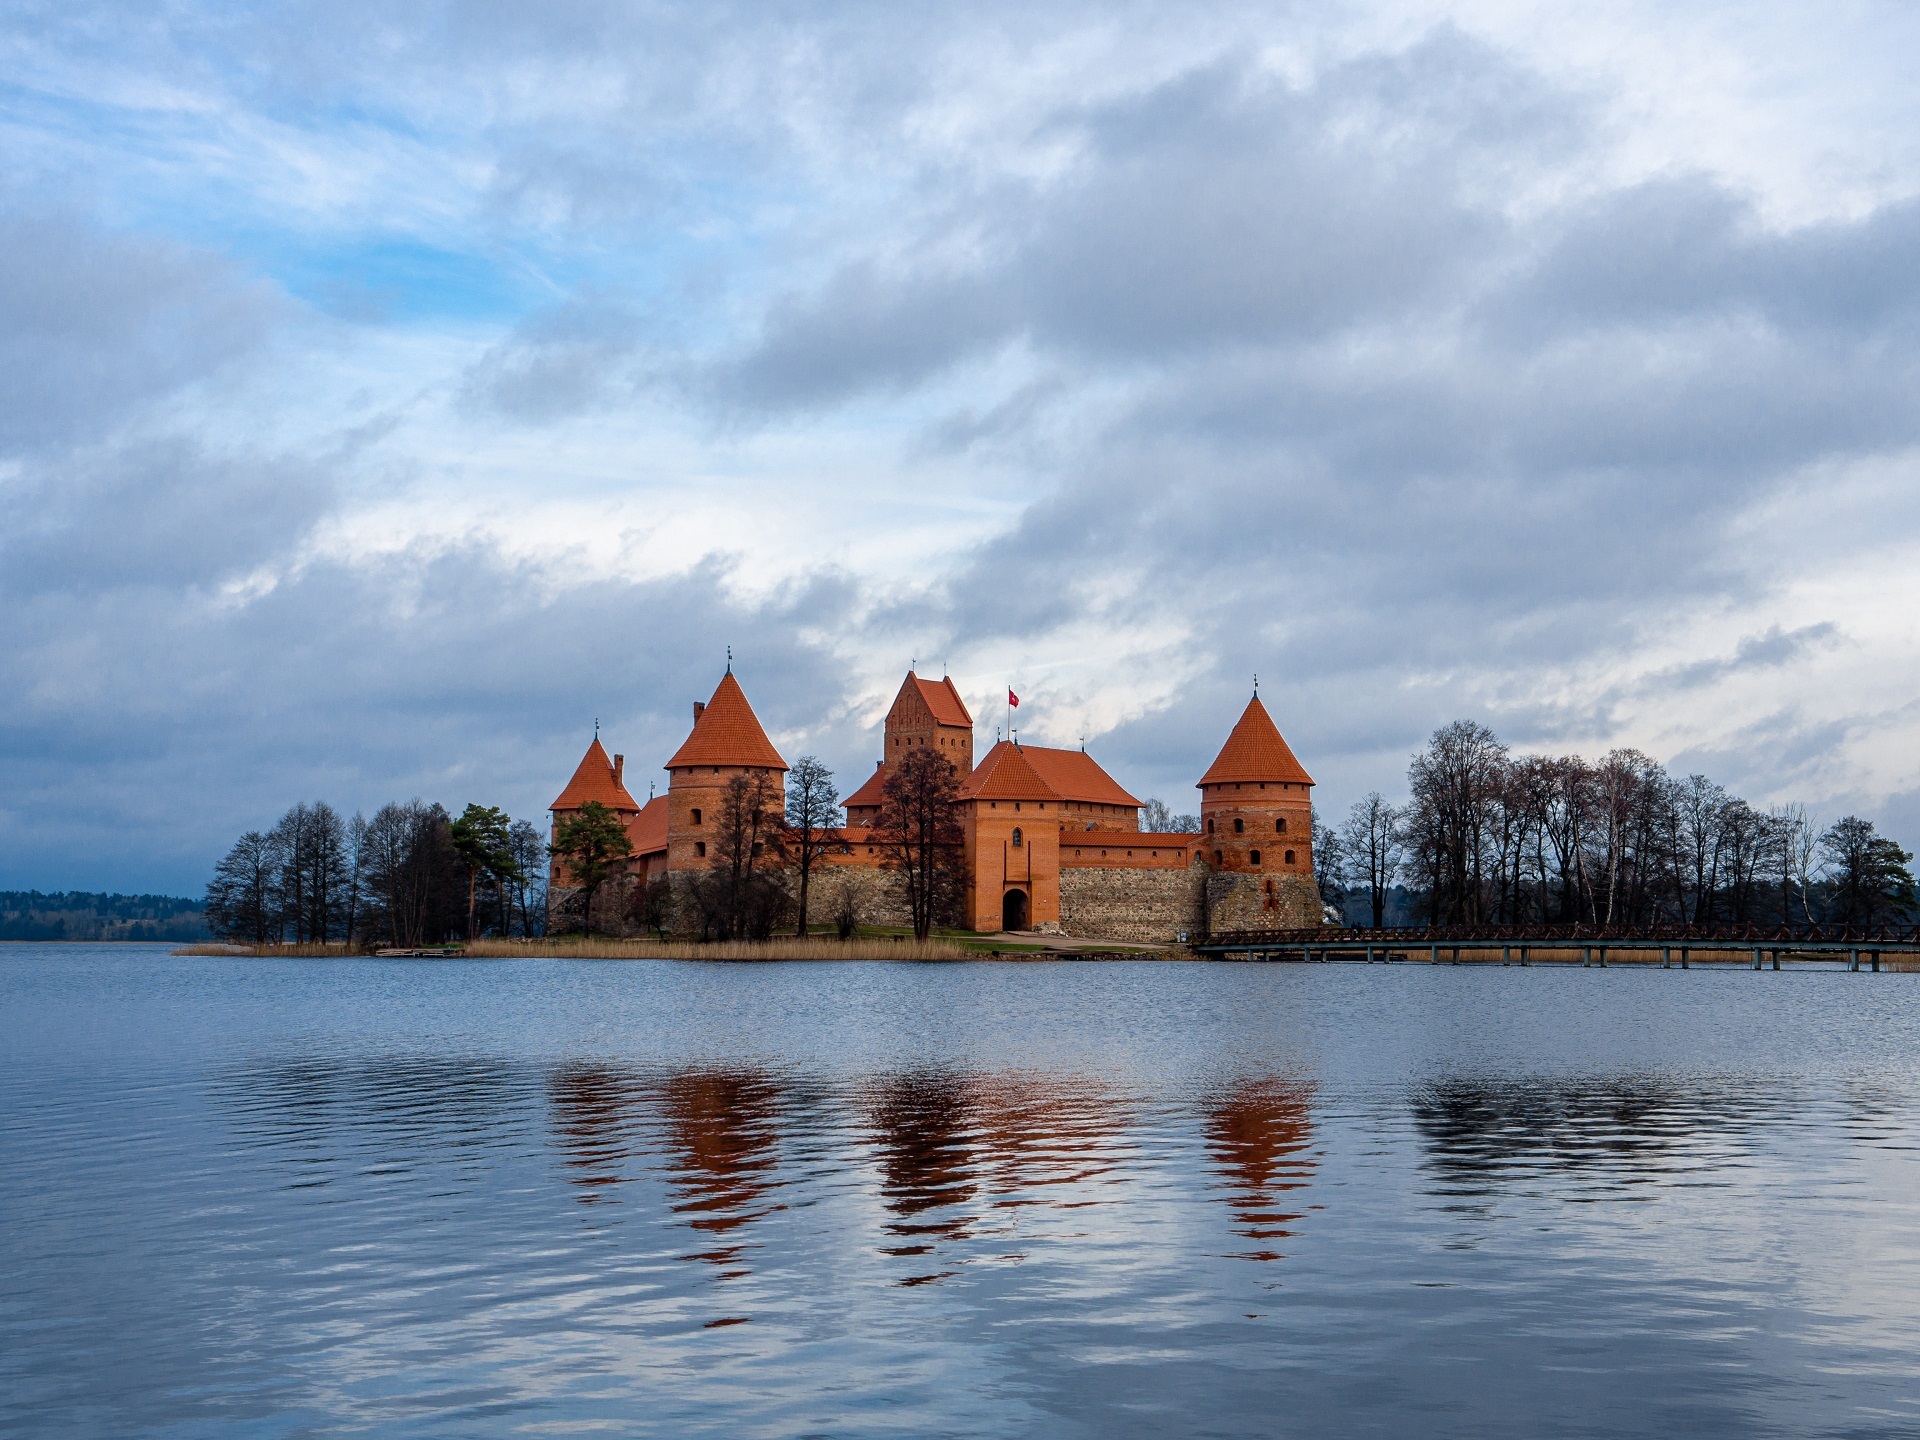 A mesmerizing view of Trakai Island Castle in Trakai, Lithuania surrounded by calm water